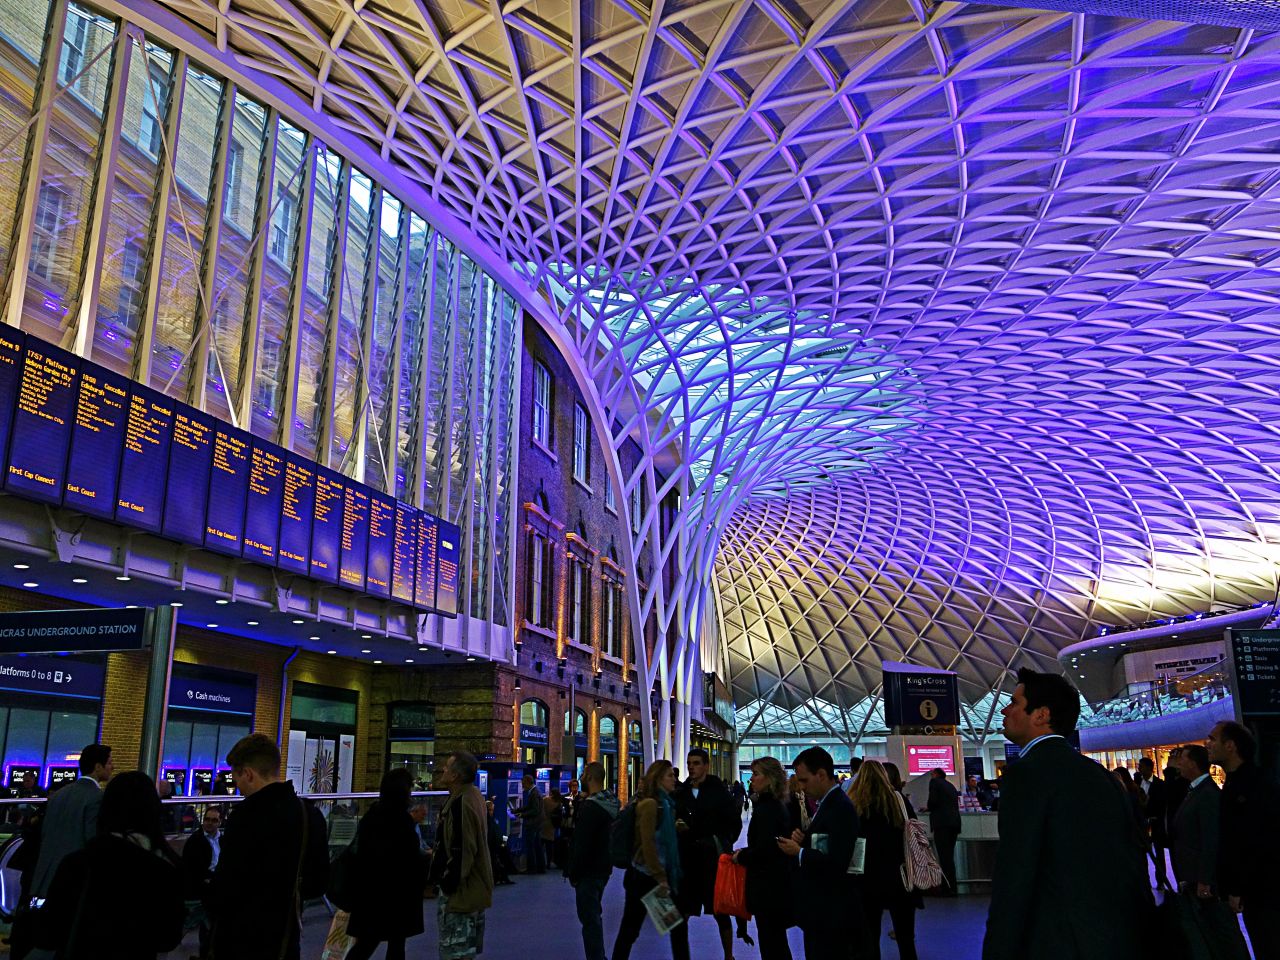 Although London's <a href="http://www.networkrail.co.uk/london-kings-cross-station/history/" target="_blank" target="_blank">King's Cross</a> railway station in opened in 1852, its new 1,700-ton steel and glass dome has given it a breathtakingly futuristic edge. Many know this station as the location of the fictional "Platform 9 3/4" in the Harry Potter novels, like <a href="http://ireport.cnn.com/docs/DOC-1133688">Timothy Holm</a>, who took this photo. 